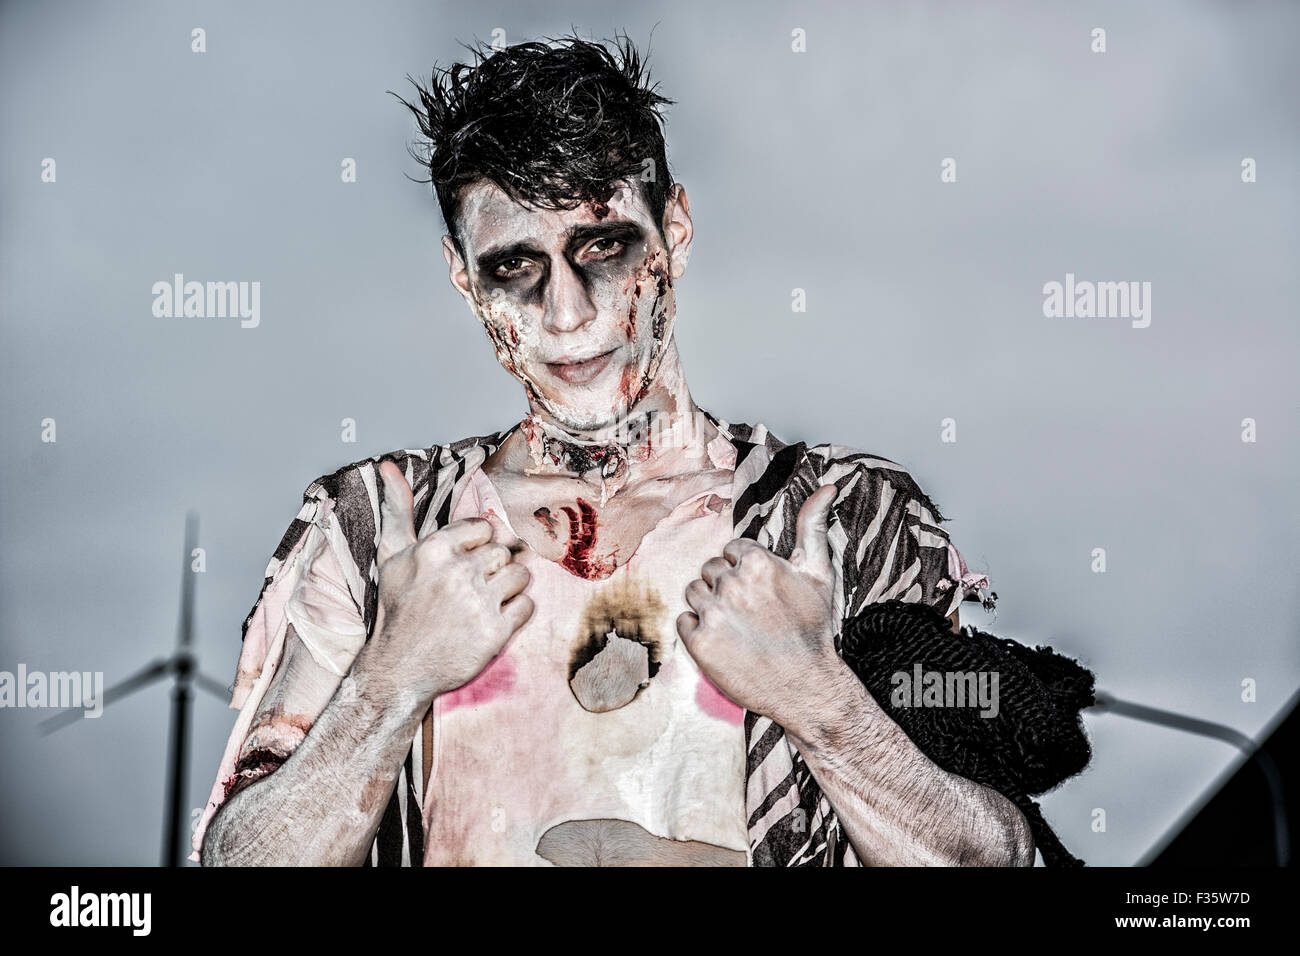 One male zombie standing in empty city street at night looking at camera. Halloween theme Stock Photo